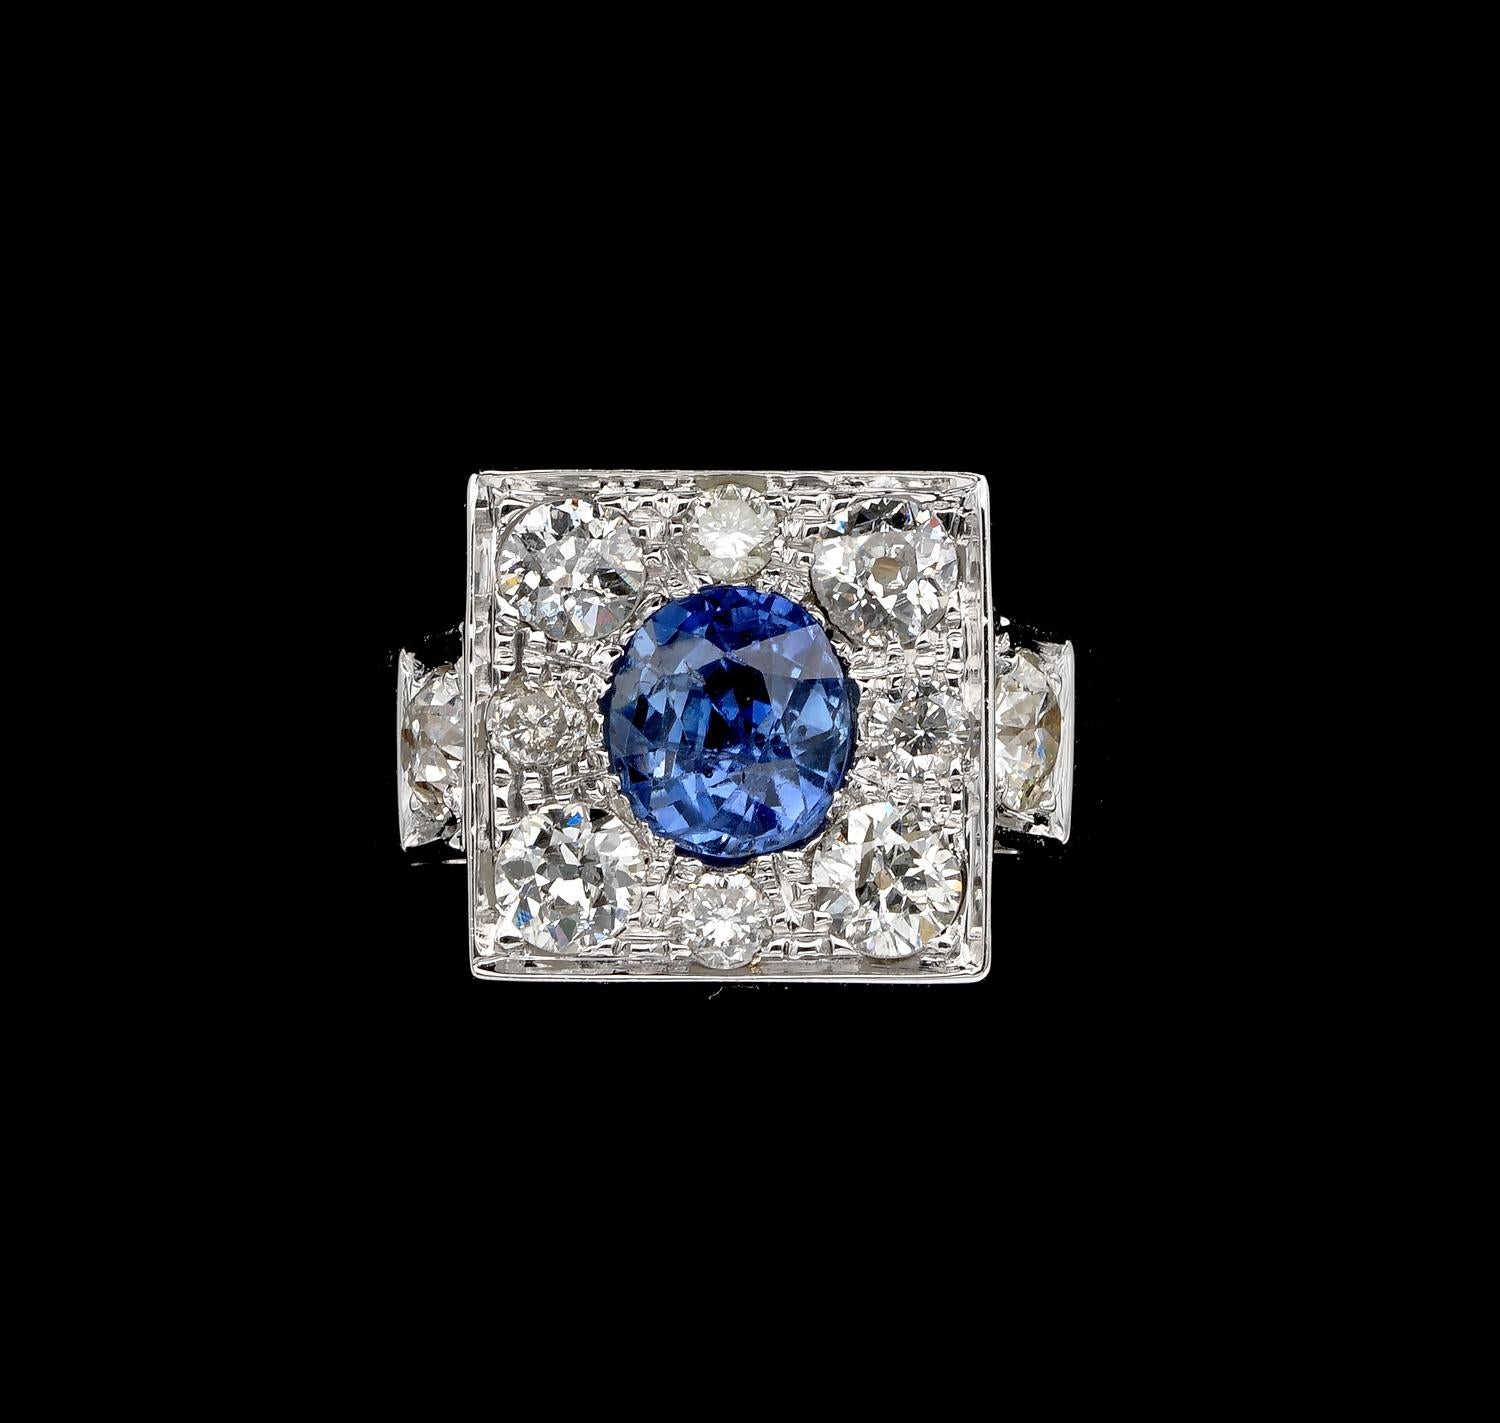 Stellar Sapphire!

This outstanding Diamond and Natural sapphire ring dates 1935 ca
Distinctive design of sleek style substantially hand created of solid 18 KT white gold, punched for gold and maker mark
The linear crown of imposing look raises up